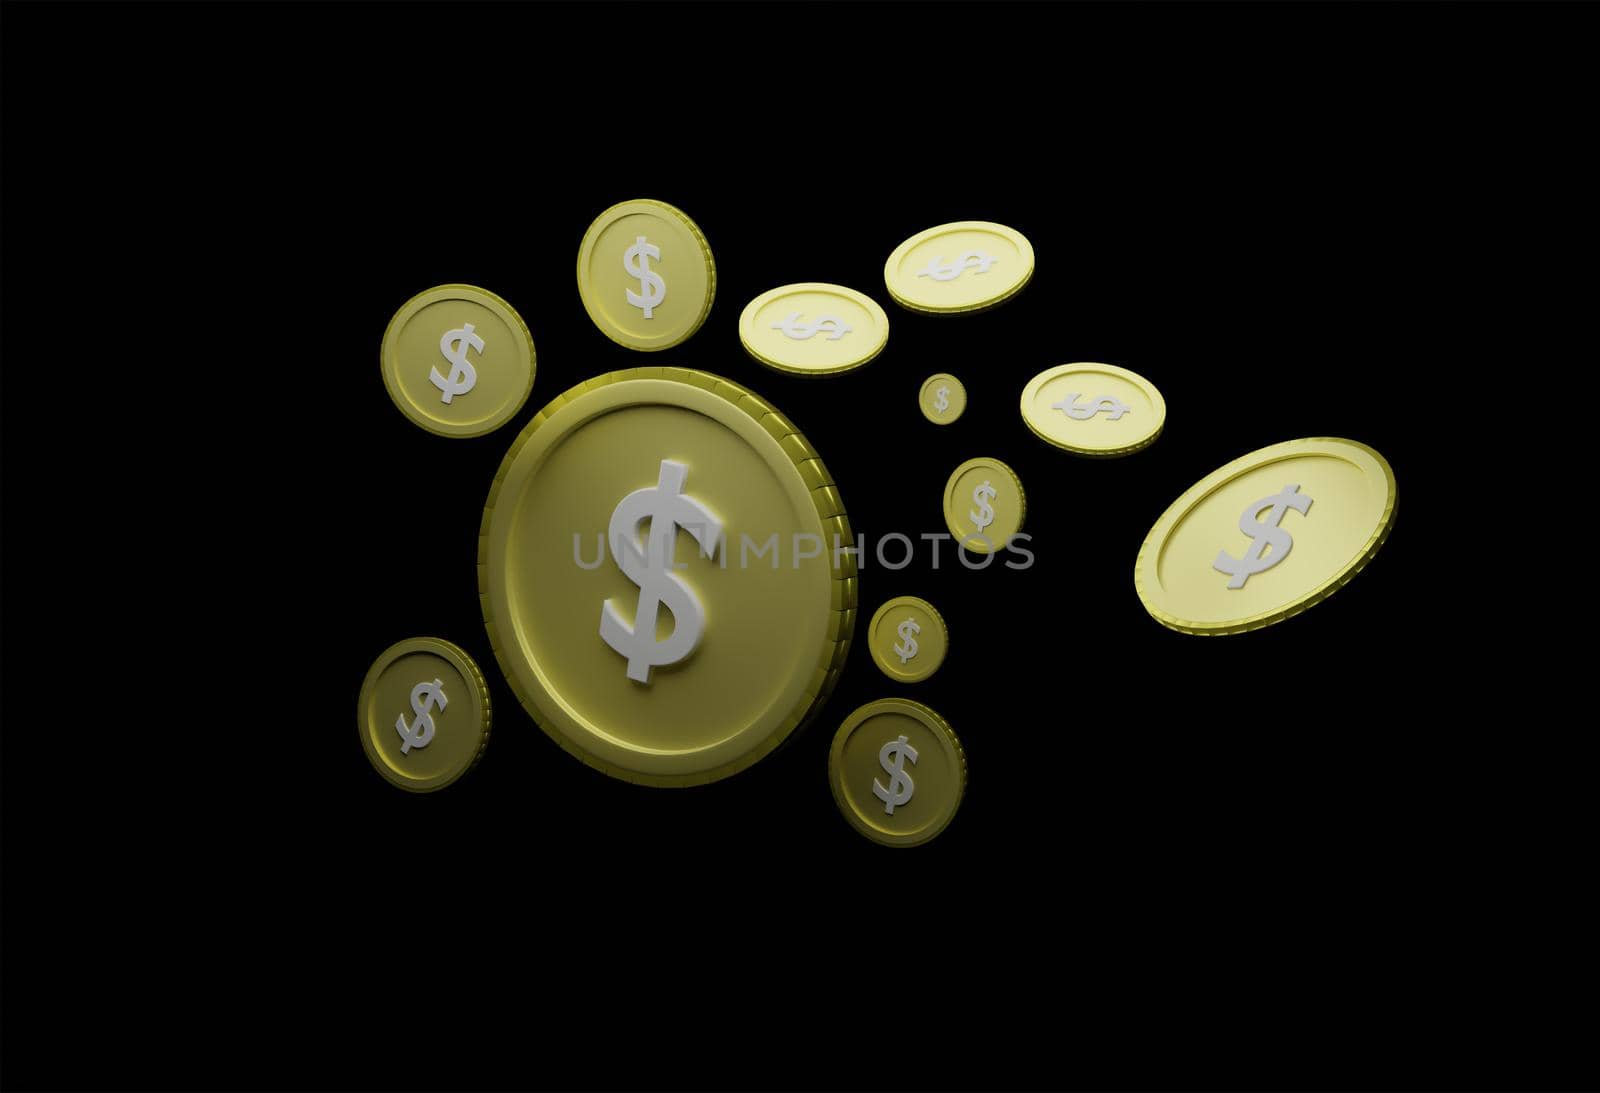 Abstract floating us dollar coin Black background isolated
Concept of currency analysis from economic fluctuations in export trade, global market valuation 3D rendering. by noppha80